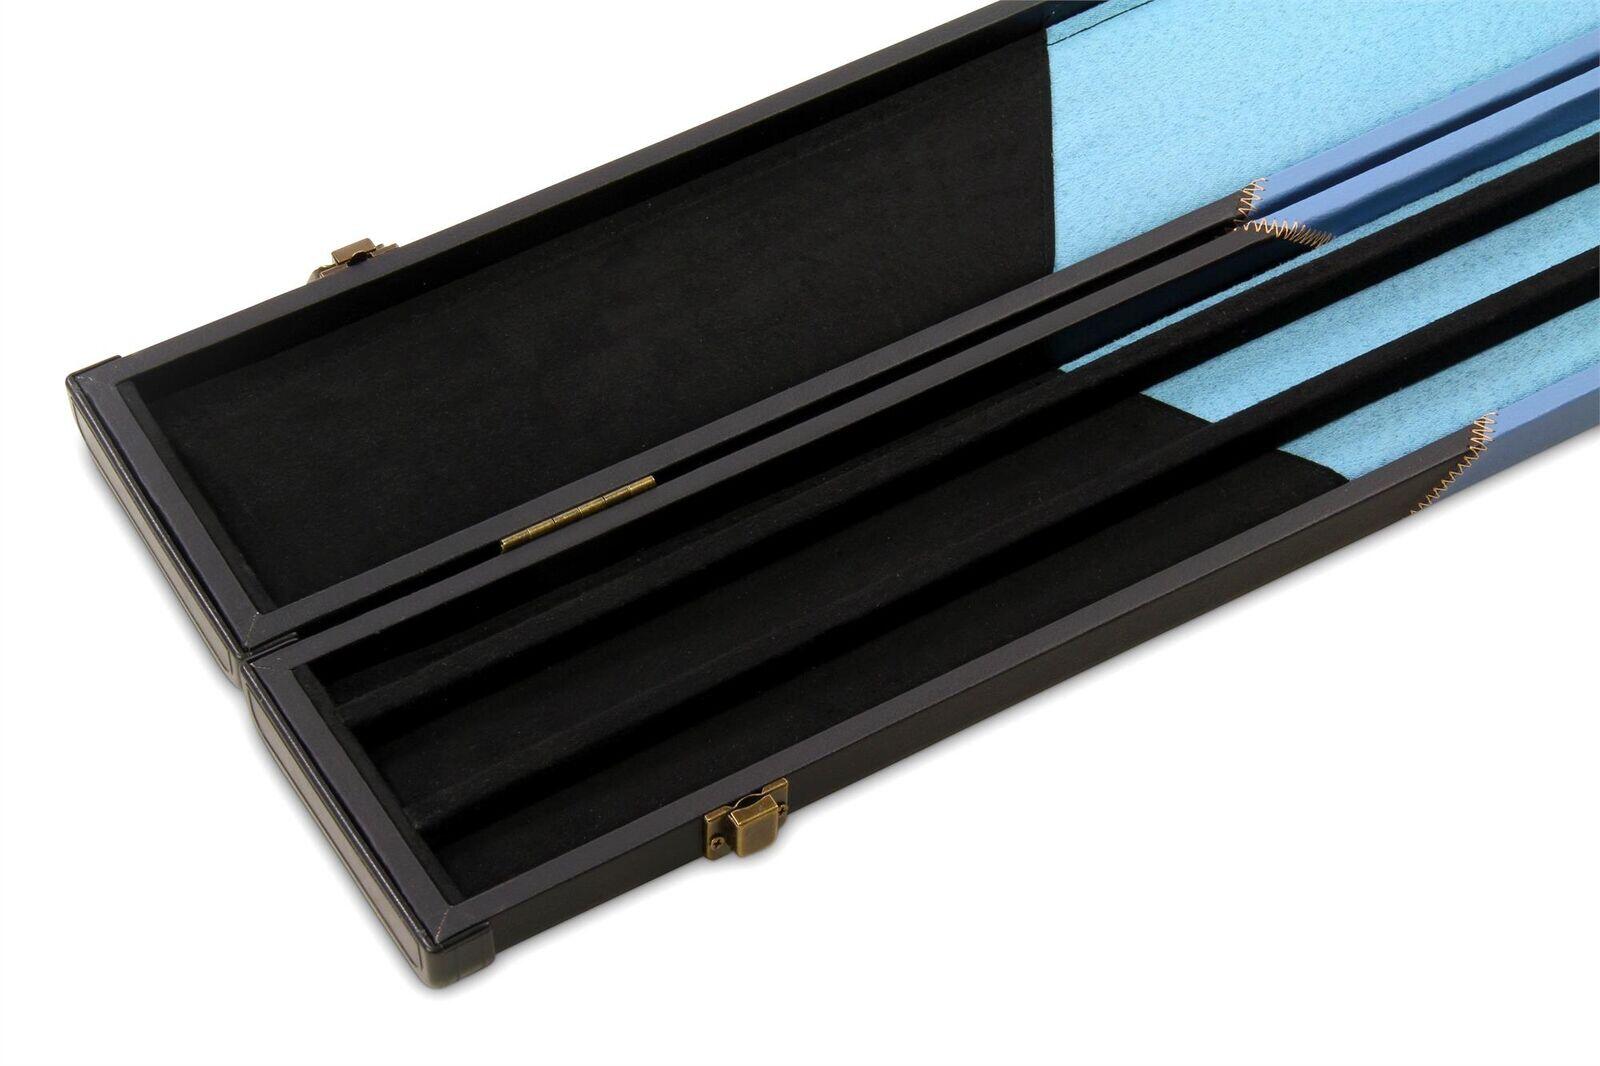 Baize Master 1 Piece WIDE SKY BLUE ARROW Snooker Pool Cue Case - Holds 3 Cues 6/7